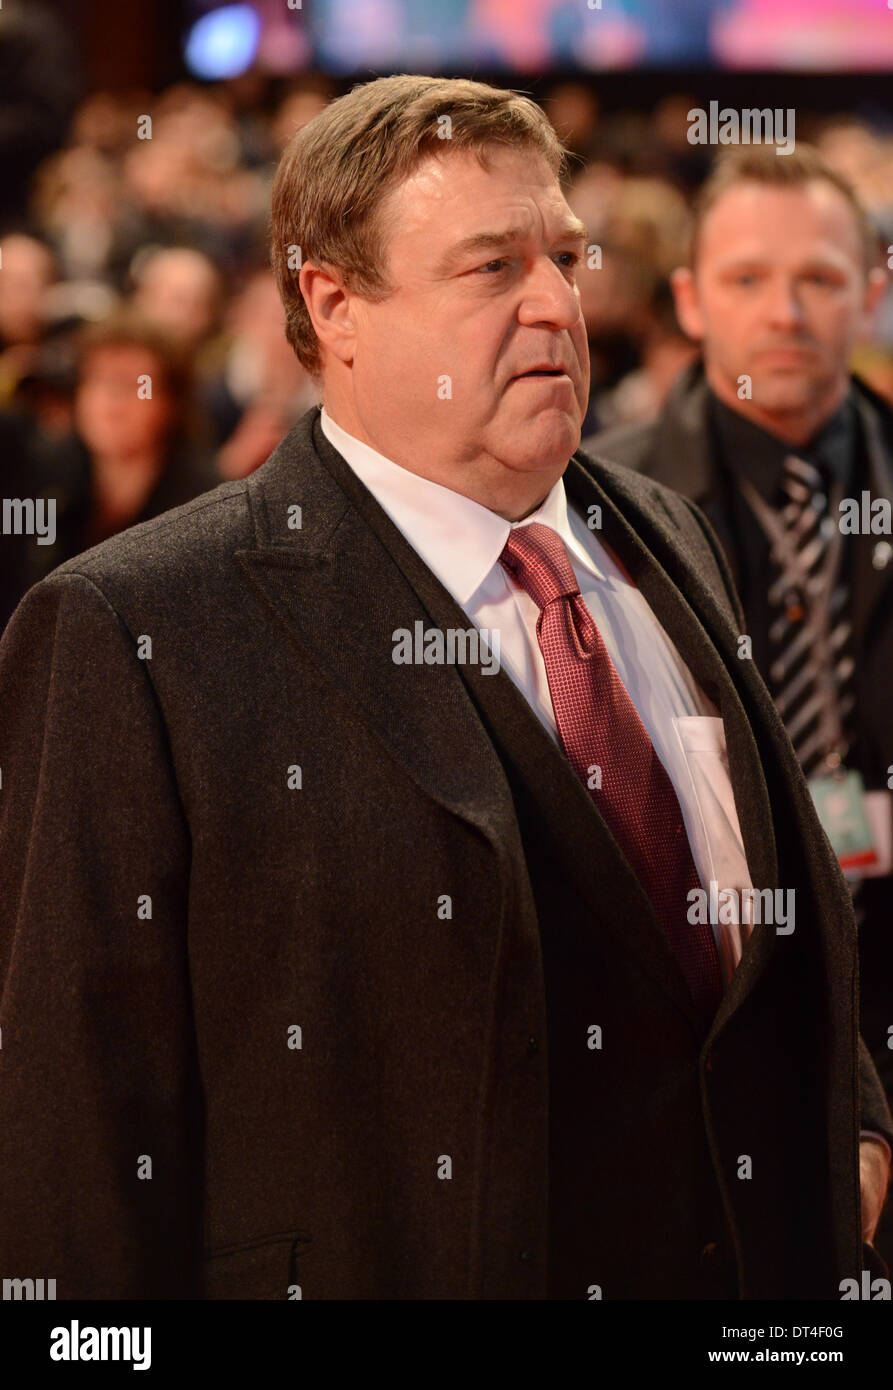 BERLIN, GERMANY, 8th Feb, 2014. John Goodman attends the 'The Monuments Men' Premiere at the 64th Annual Berlinale International Film Festival at Berlinale Palast on February 8th, 2014 in Berlin, Germany. Credit:  Janne Tervonen/Alamy Live News Stock Photo